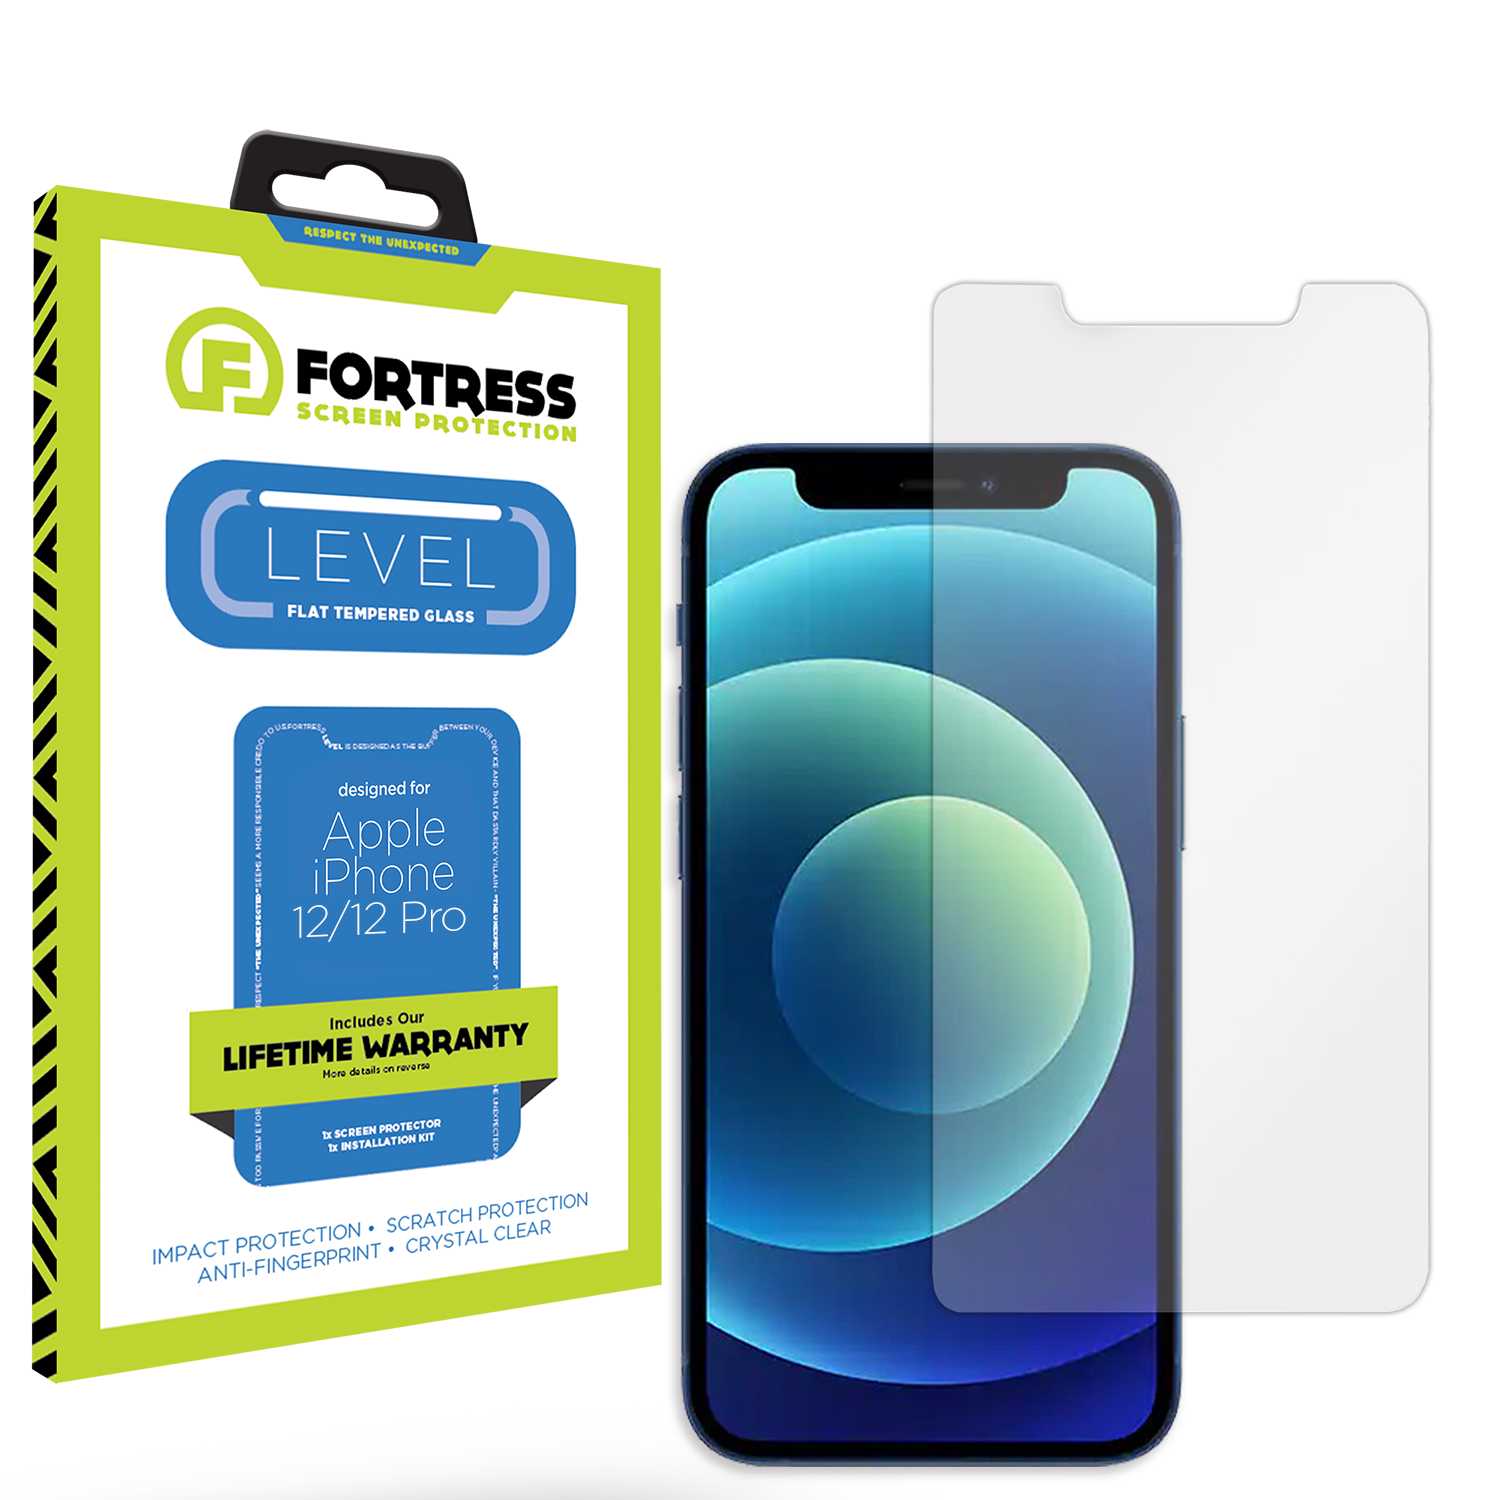 Fortress iPhone 12 Pro Screen Protector $0Coverage Scooch Screen Protector